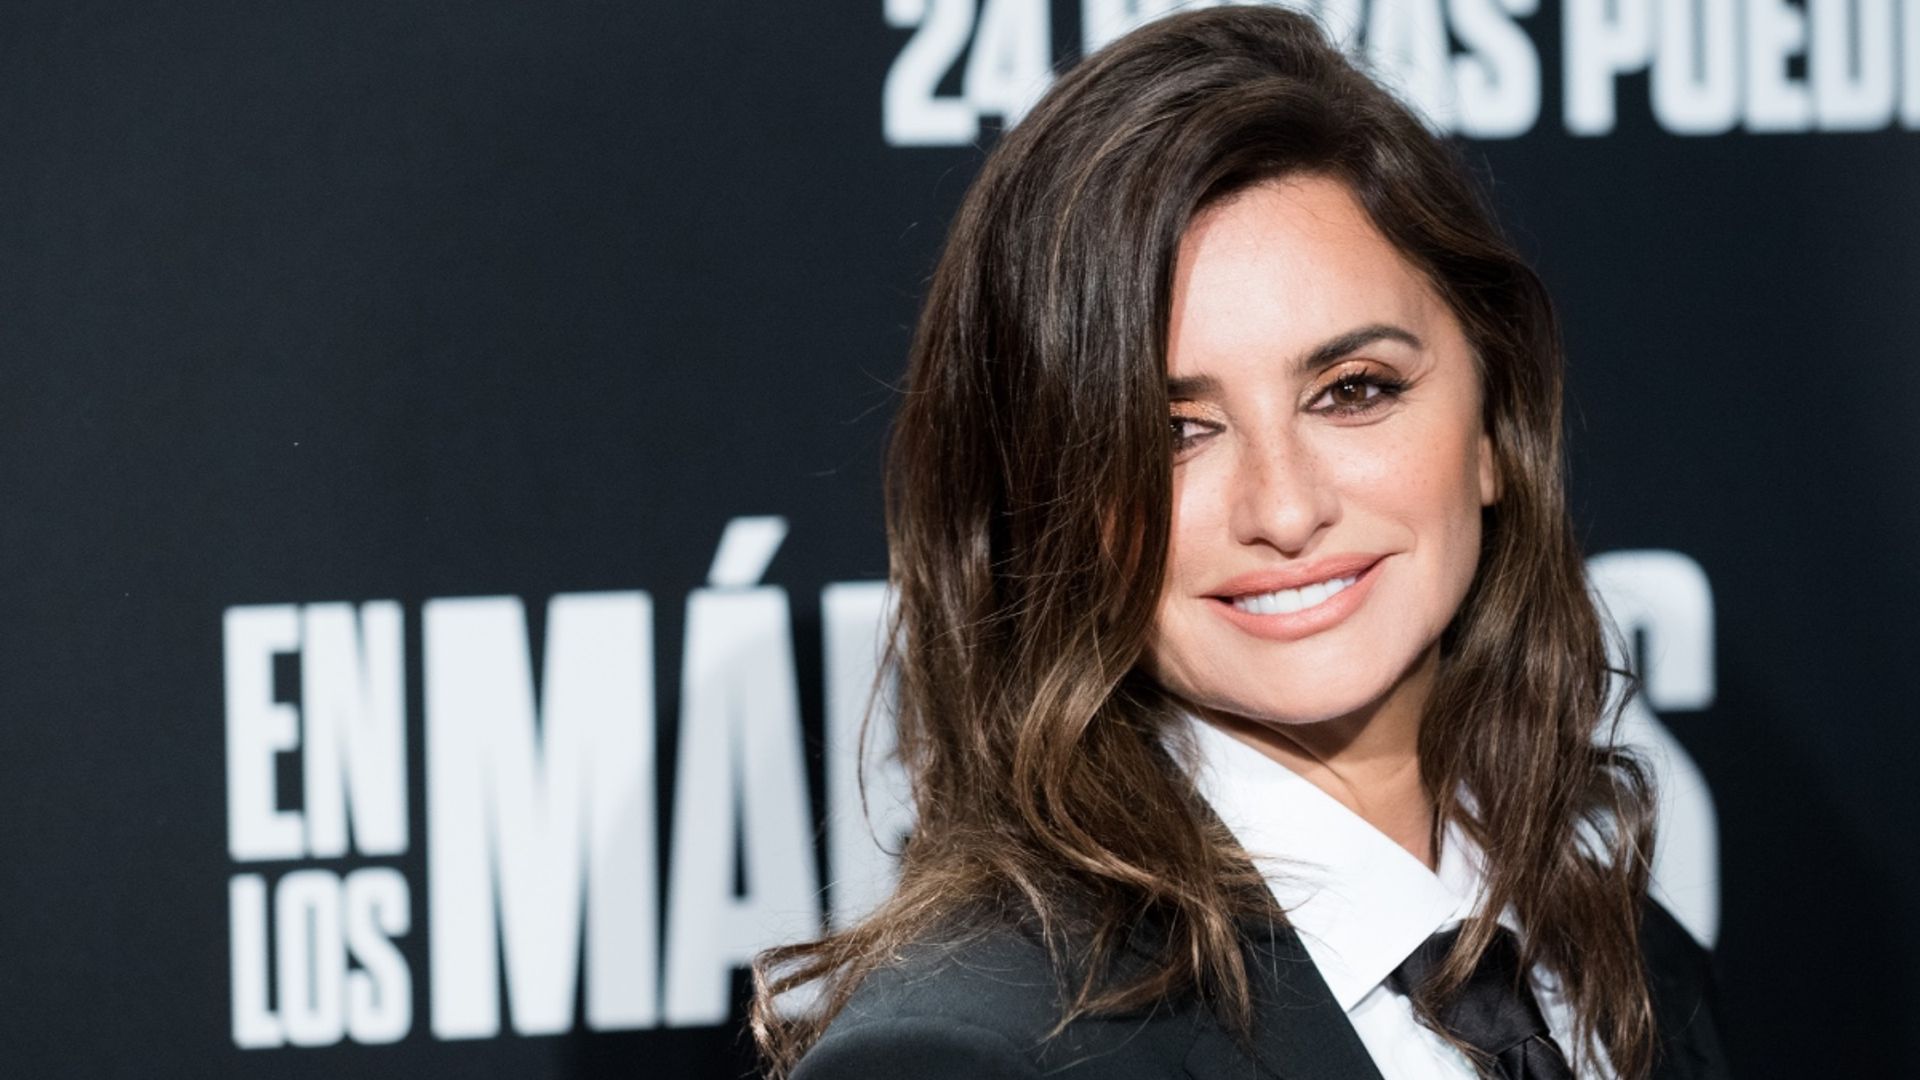 Penelope Cruz dons form-fitting suit and tie in unexpected red carpet pivot  | HELLO!